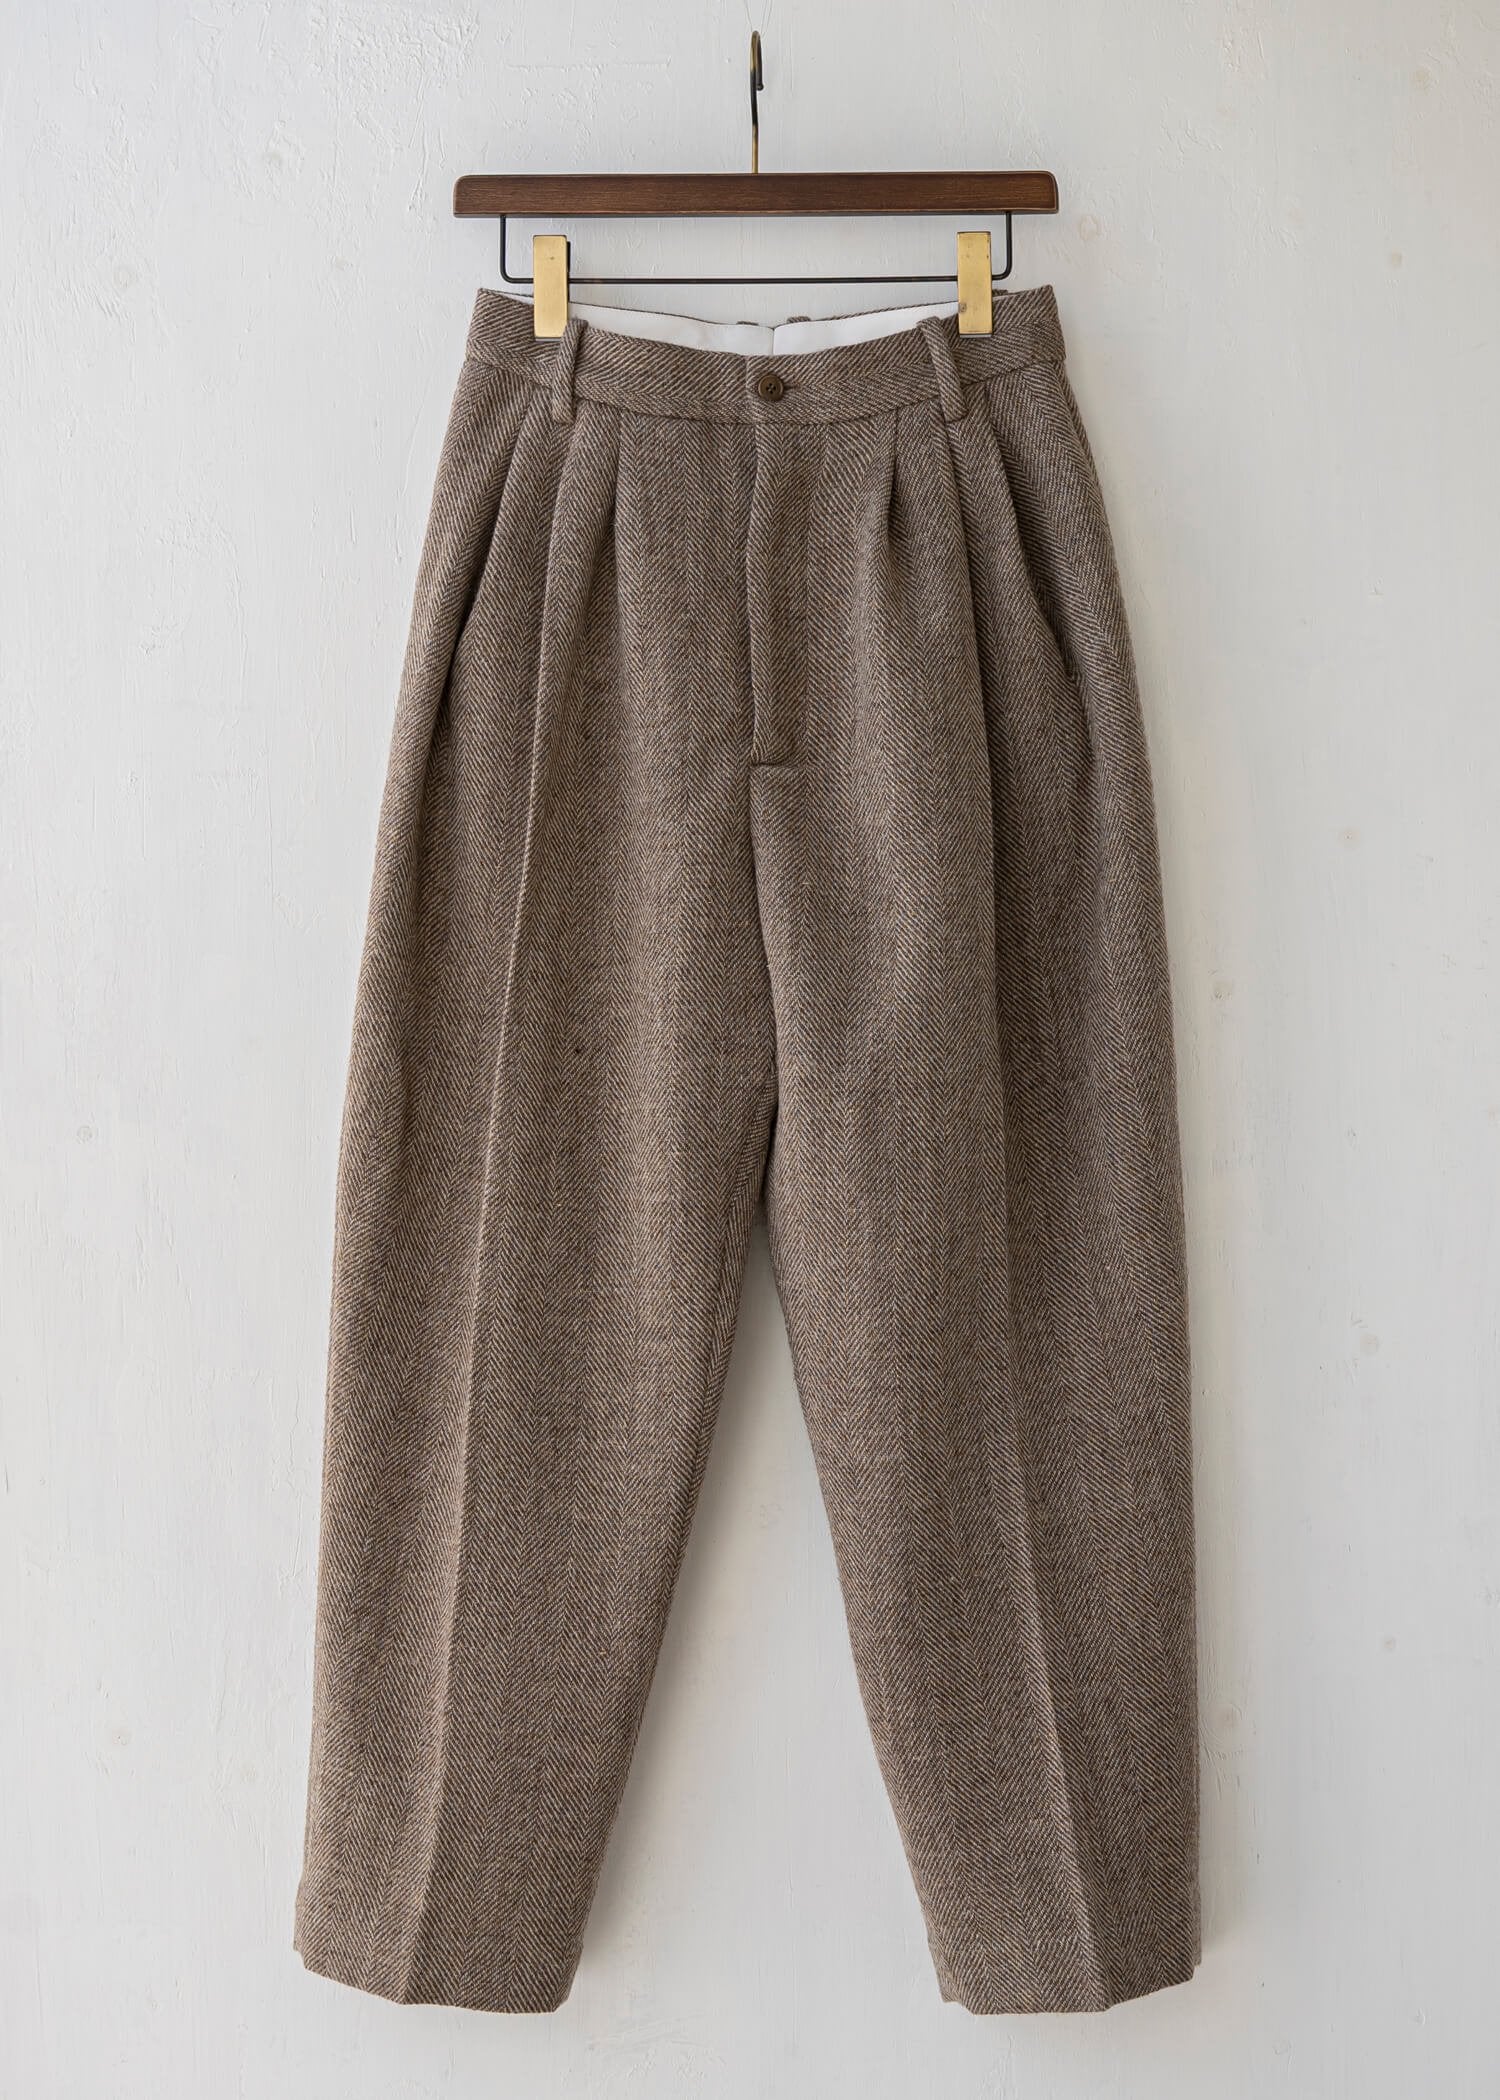 HED MAYNER / 4 PLEAT PANT